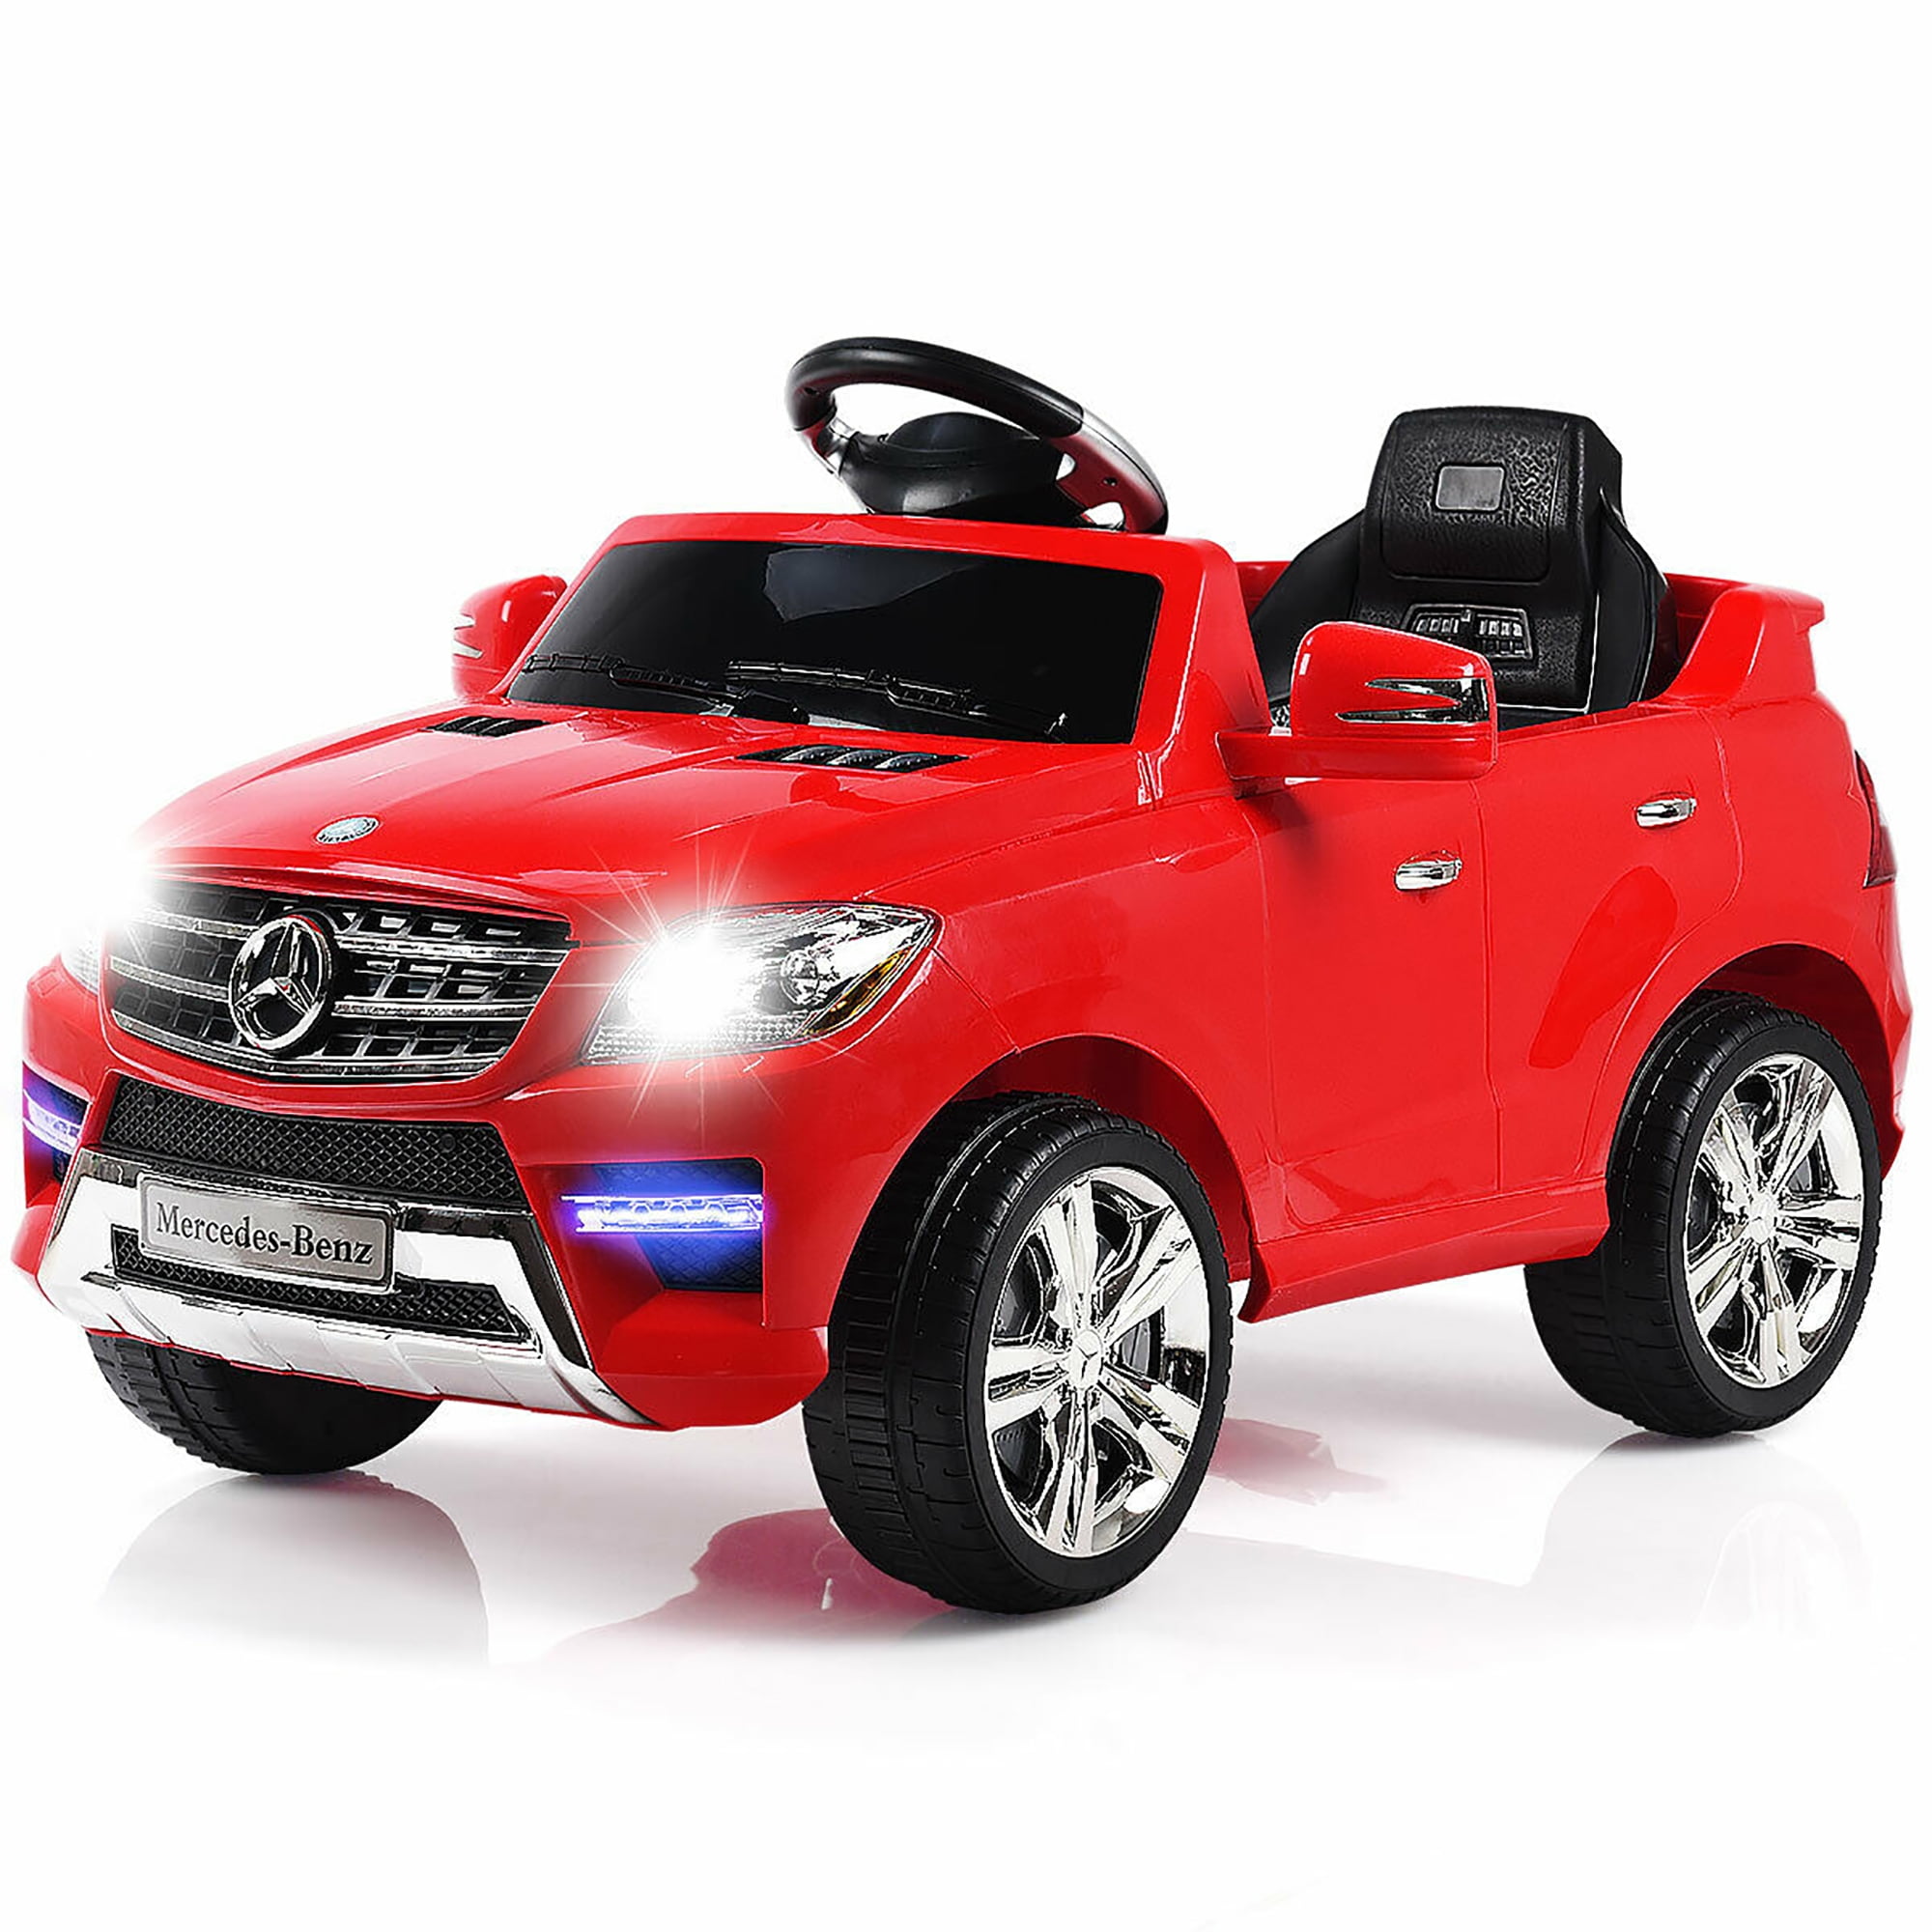 Mercedes Benz 6V Electric Kids Ride On Car Licensed MP3 RC Remote Control Red 